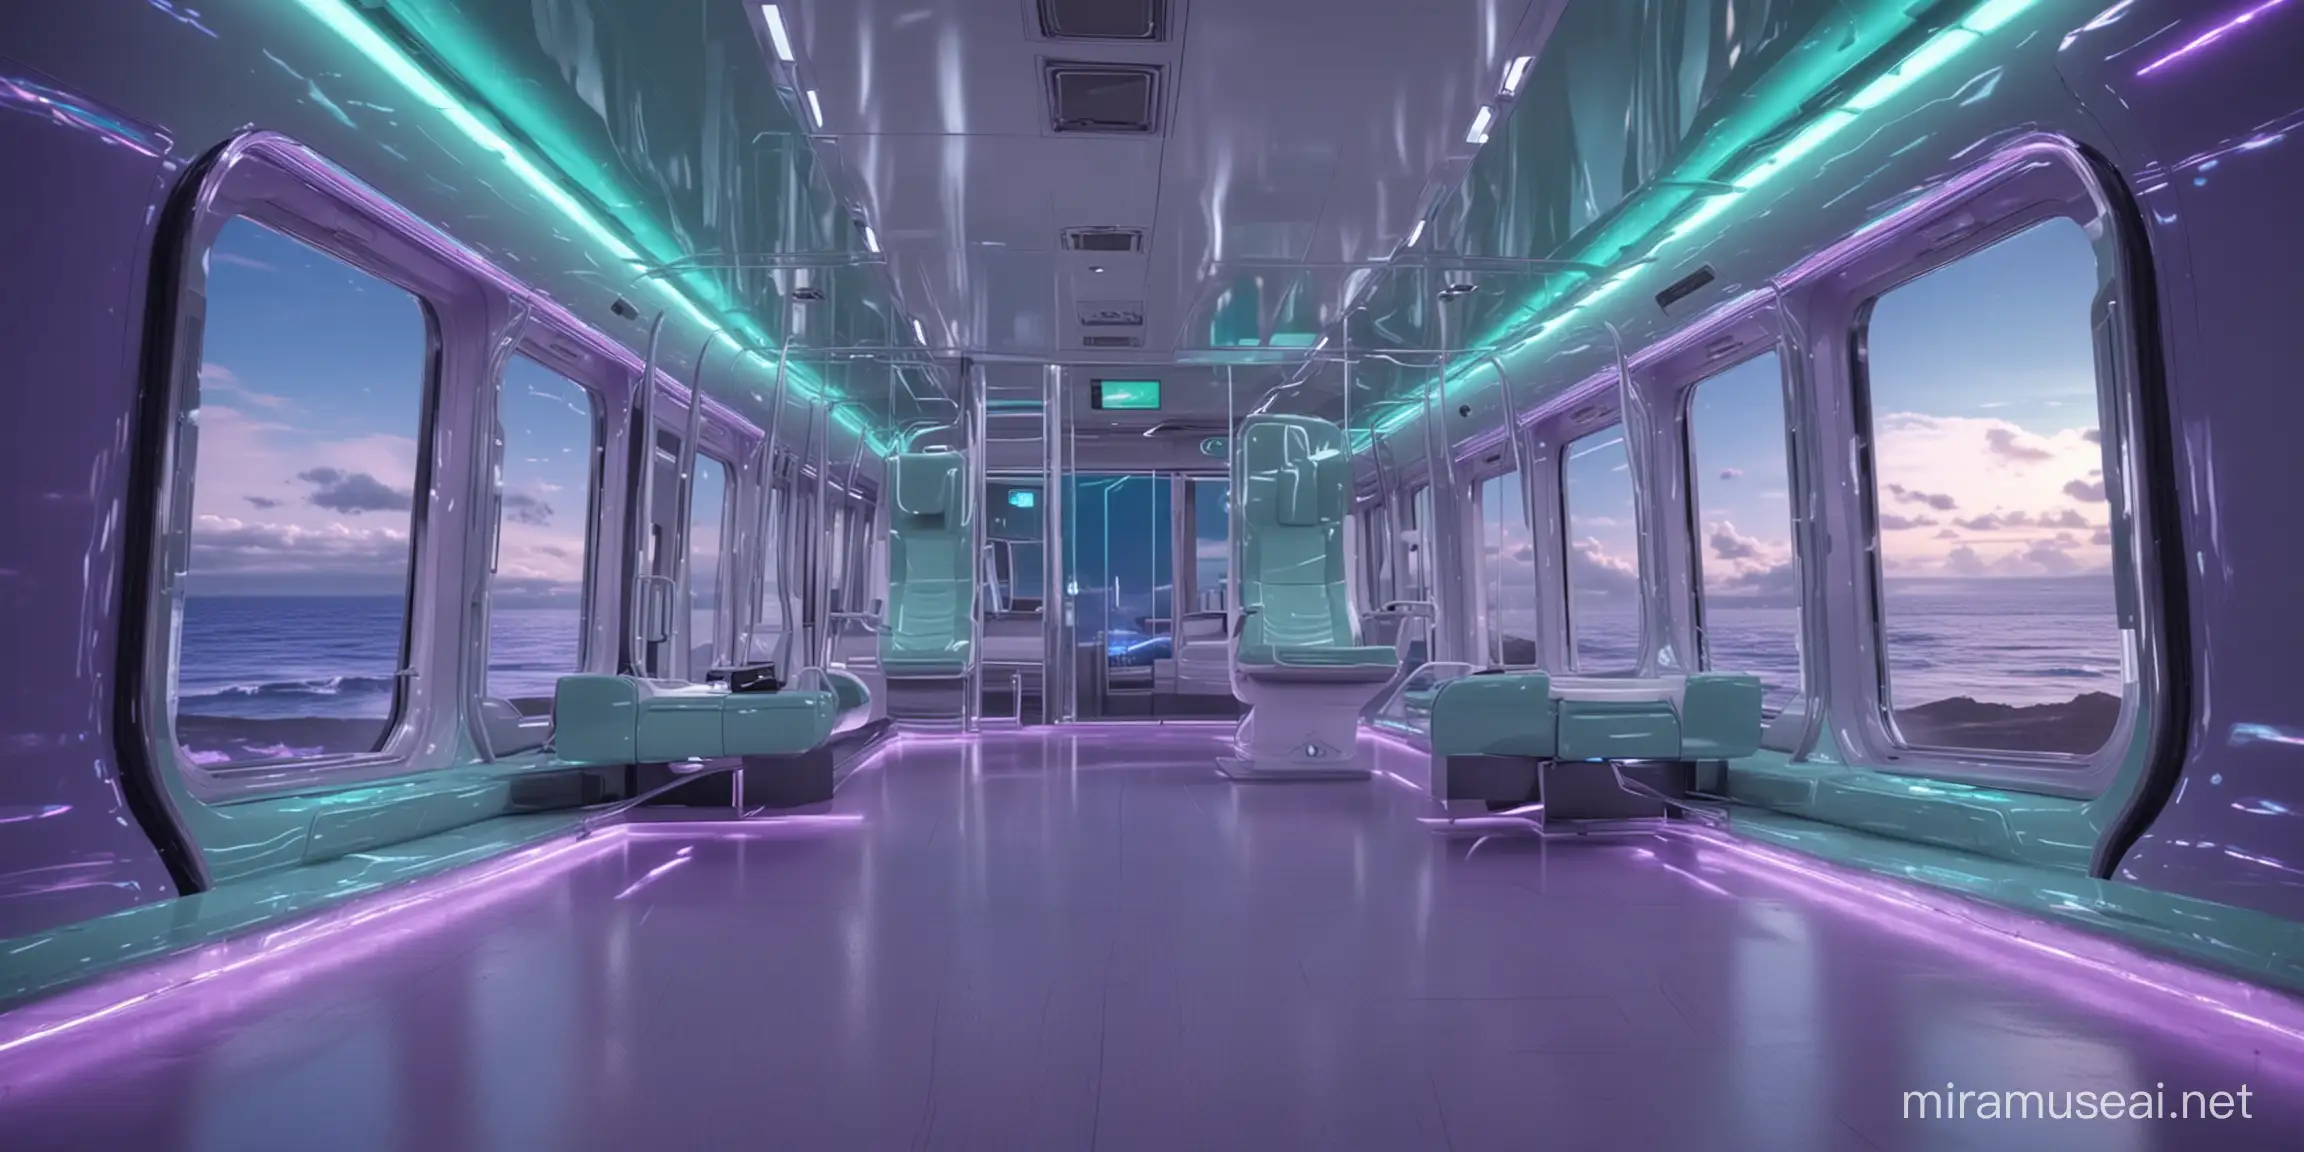 futuristic train cabin, see through floor, floor is transparent revealing a blue green ocean, future high class, transparent ceiling revealing a clear blue sky, purple and white lighting, oversized room,
Ultra High Quality, Ultra HD, 8K, Vivid Brushstrokes